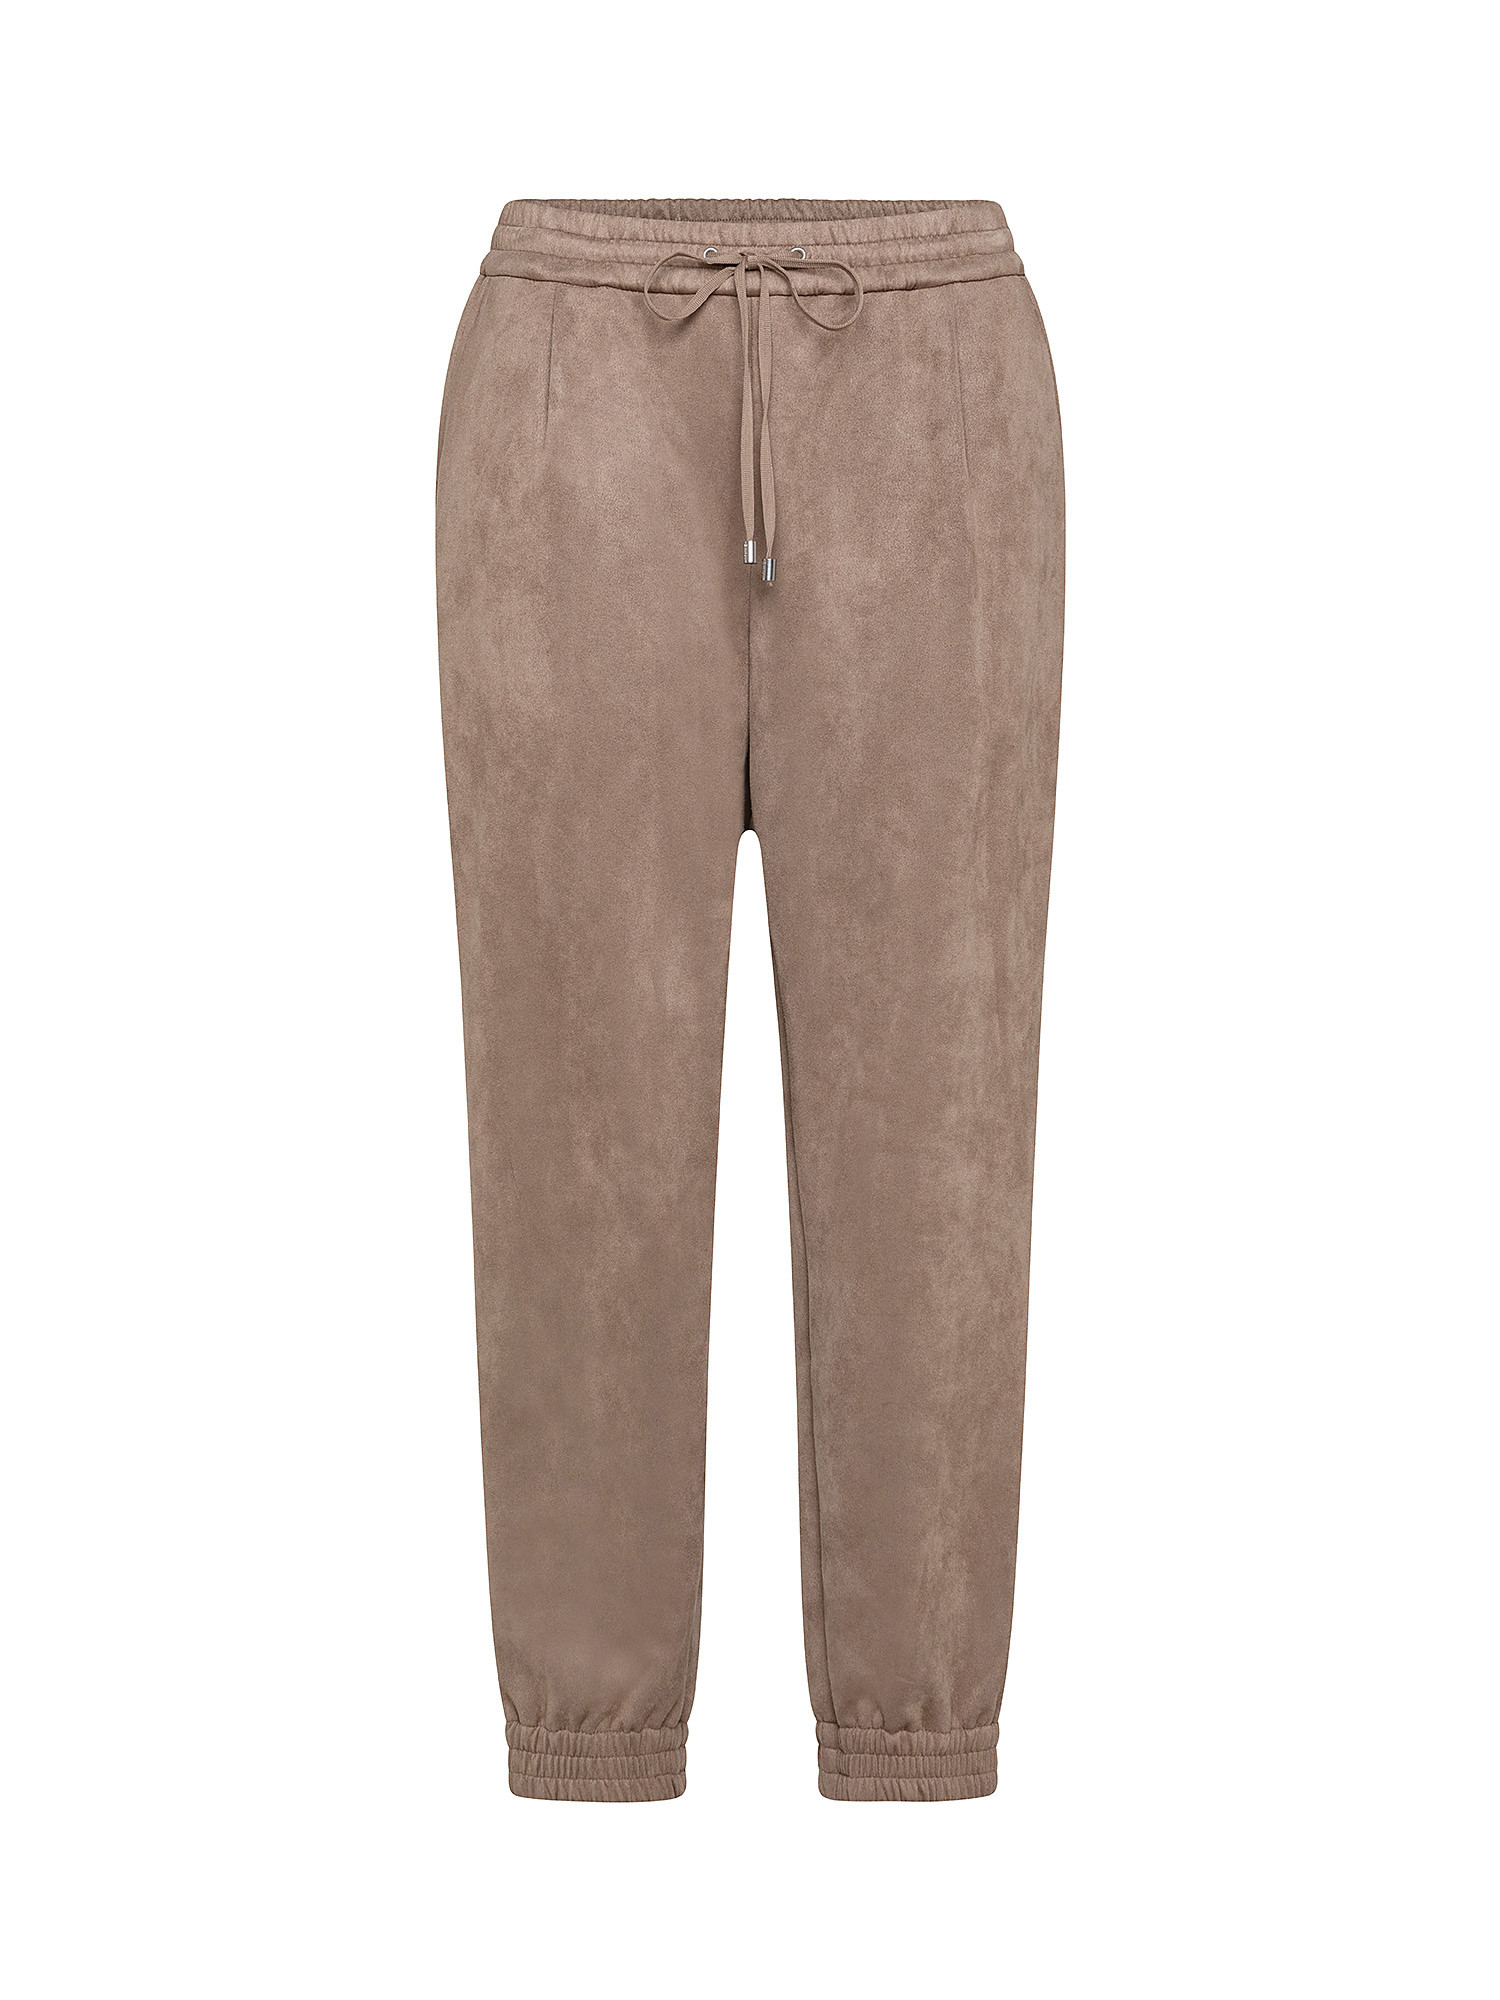 Suede jogger trousers, Brown, large image number 0